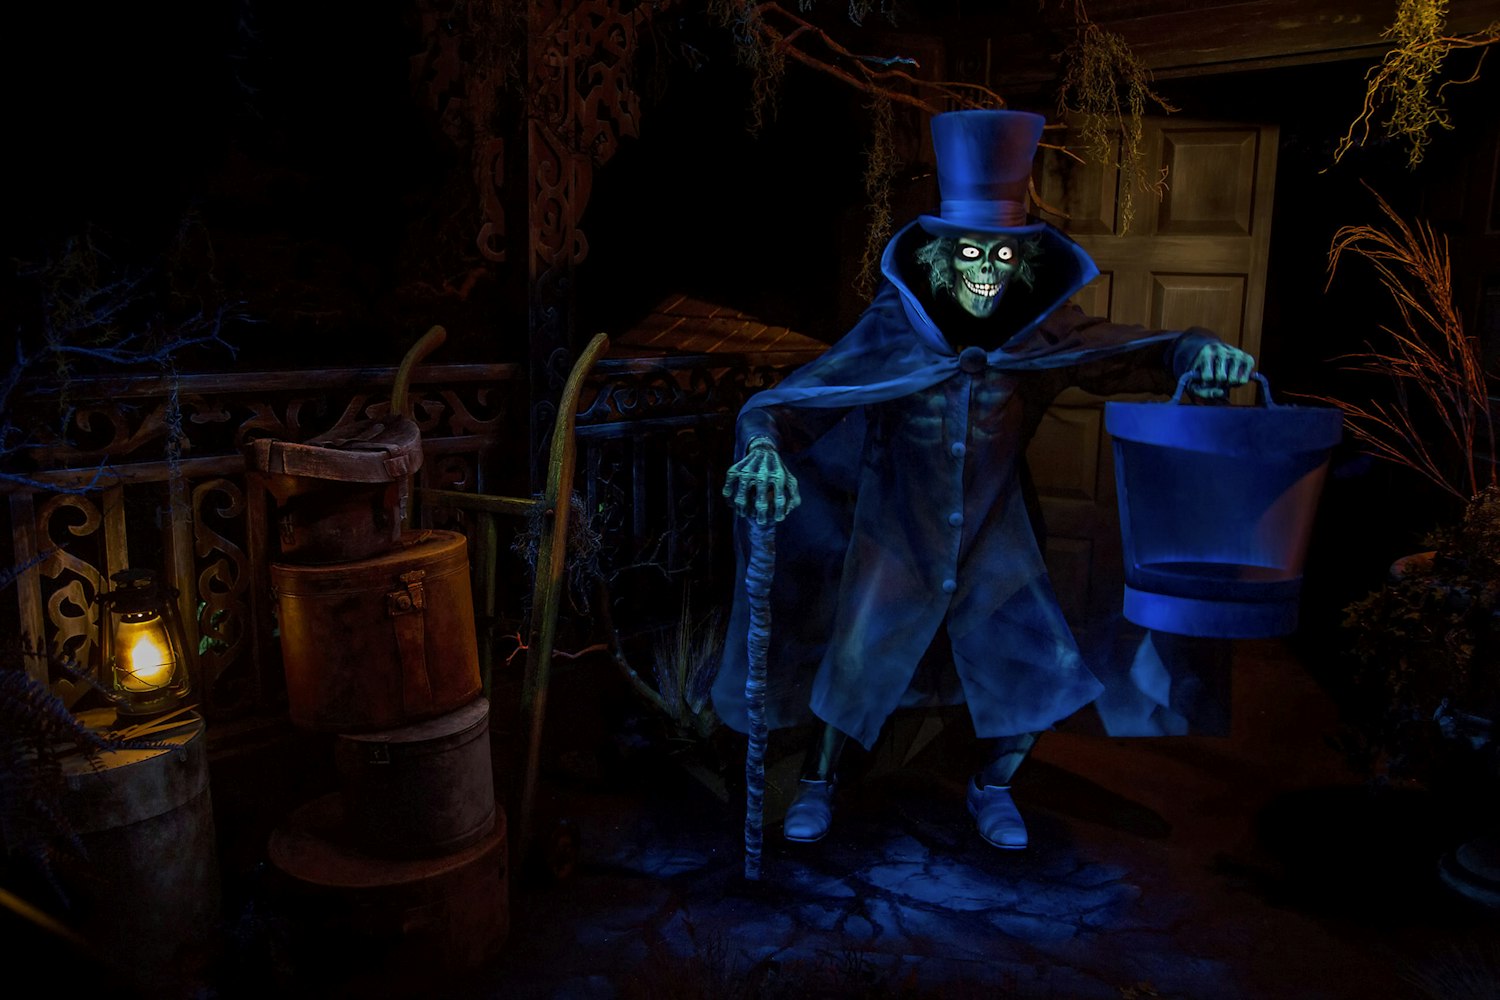 Cover Image for Hatbox Ghost Coming to Disney World’s Magic Kingdom